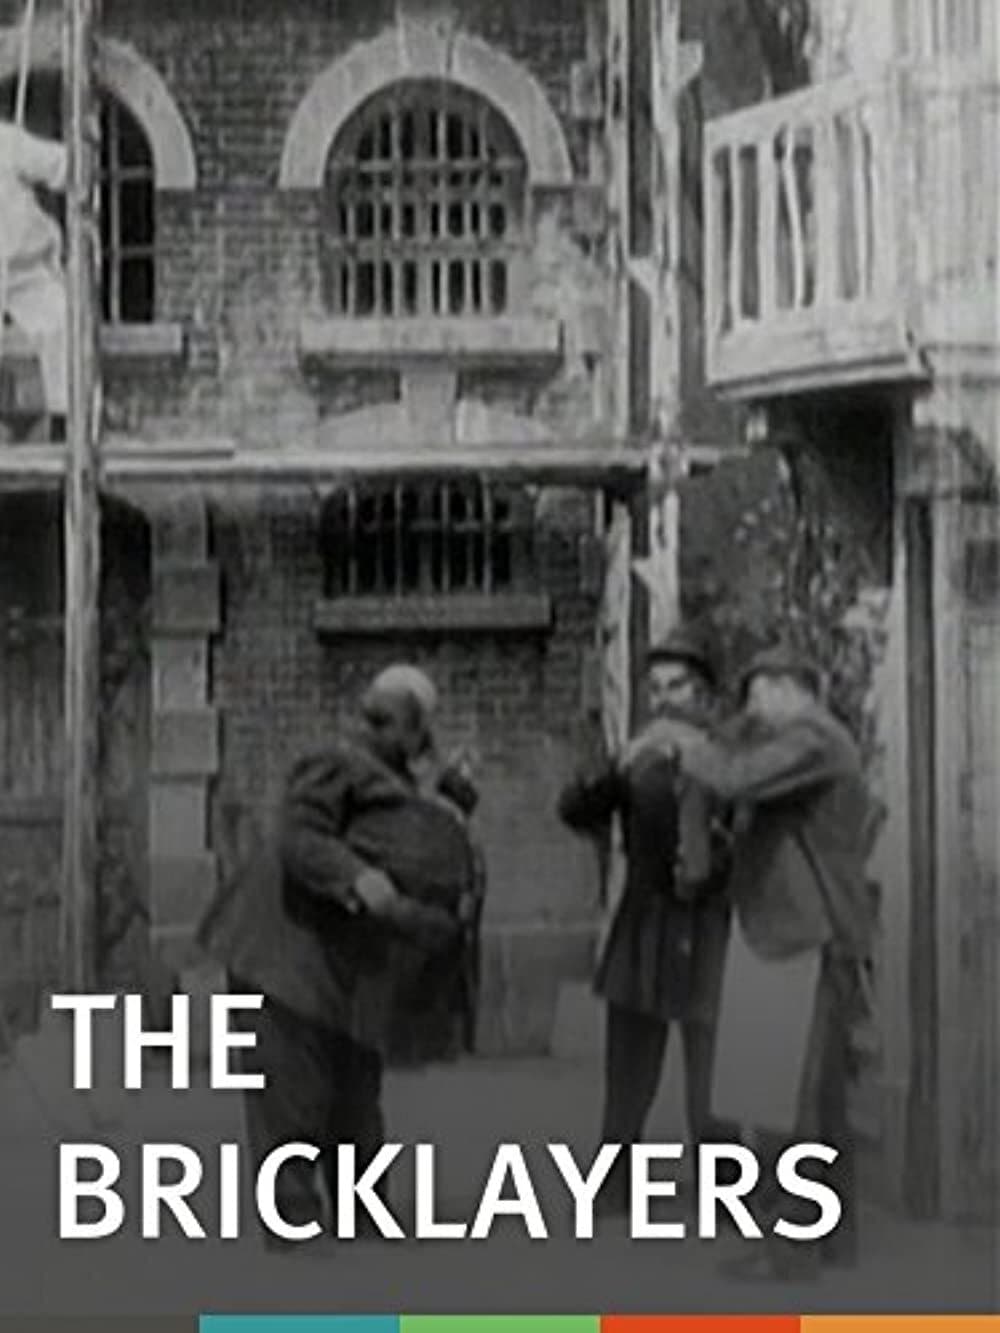 The O'Mers in 'The Bricklayers' (1905)